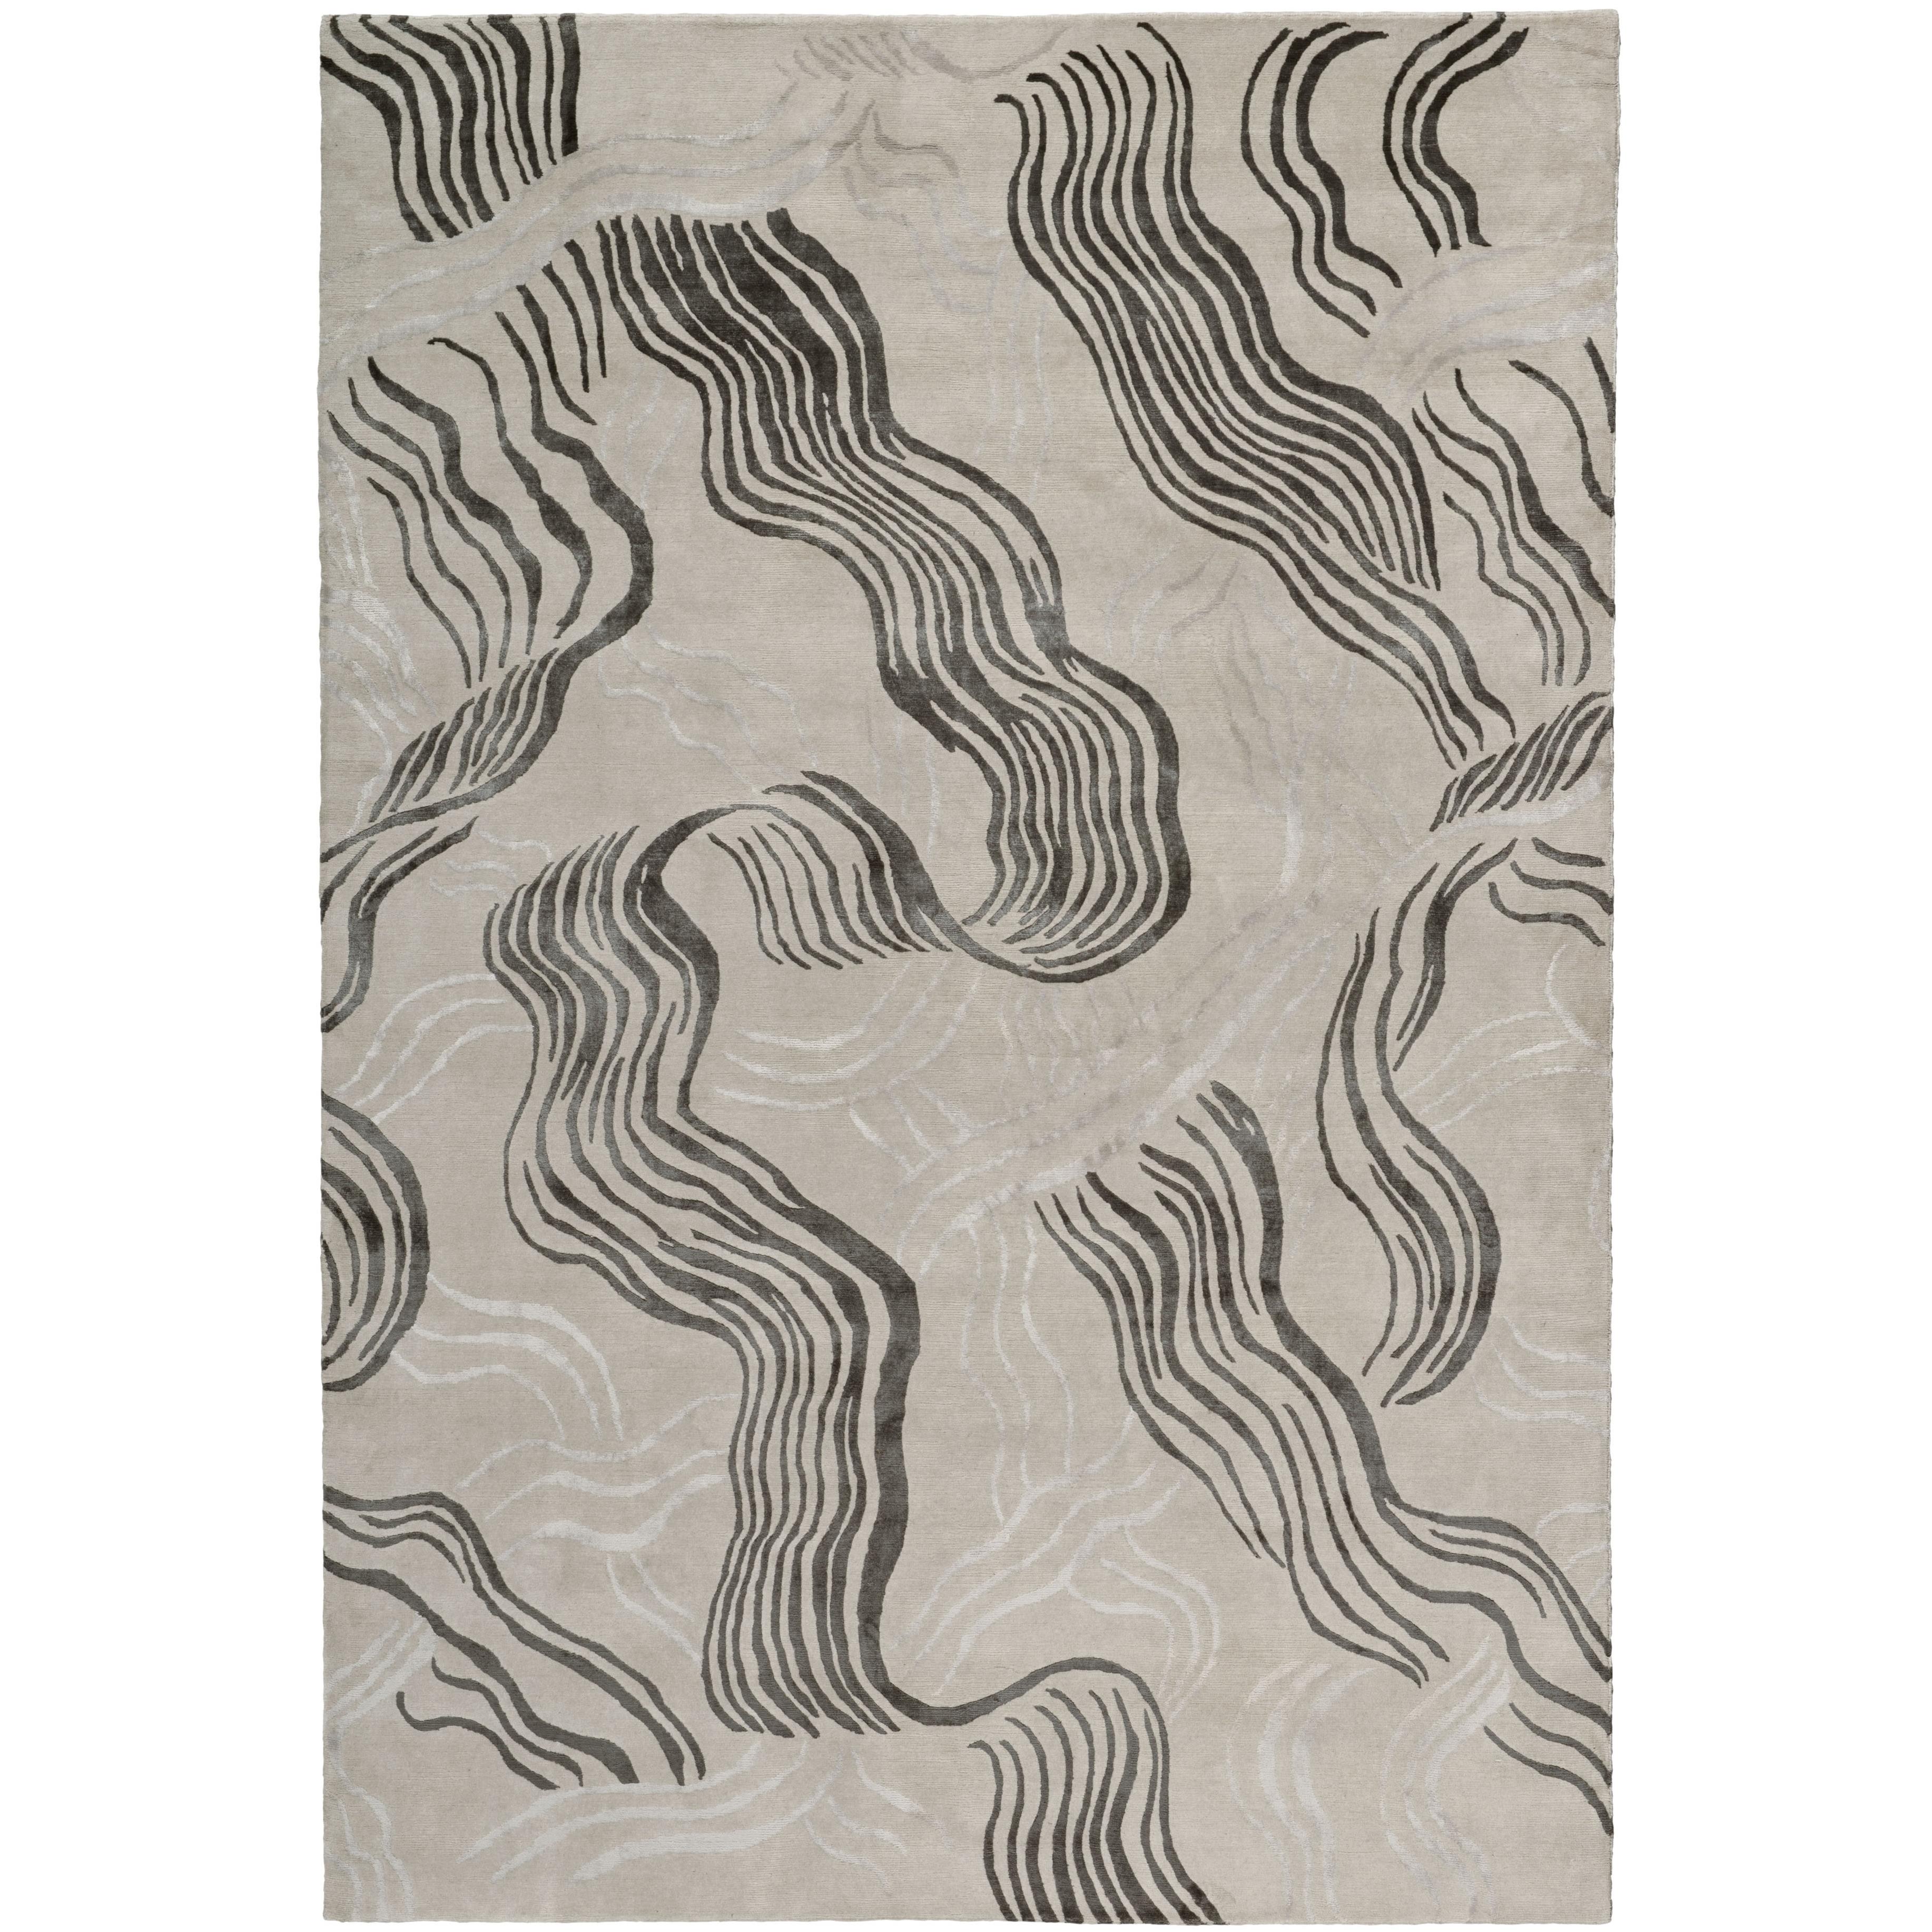 Wake Hand-Knotted 6x4 Rug in Wool and Silk by Kelly Wearstler